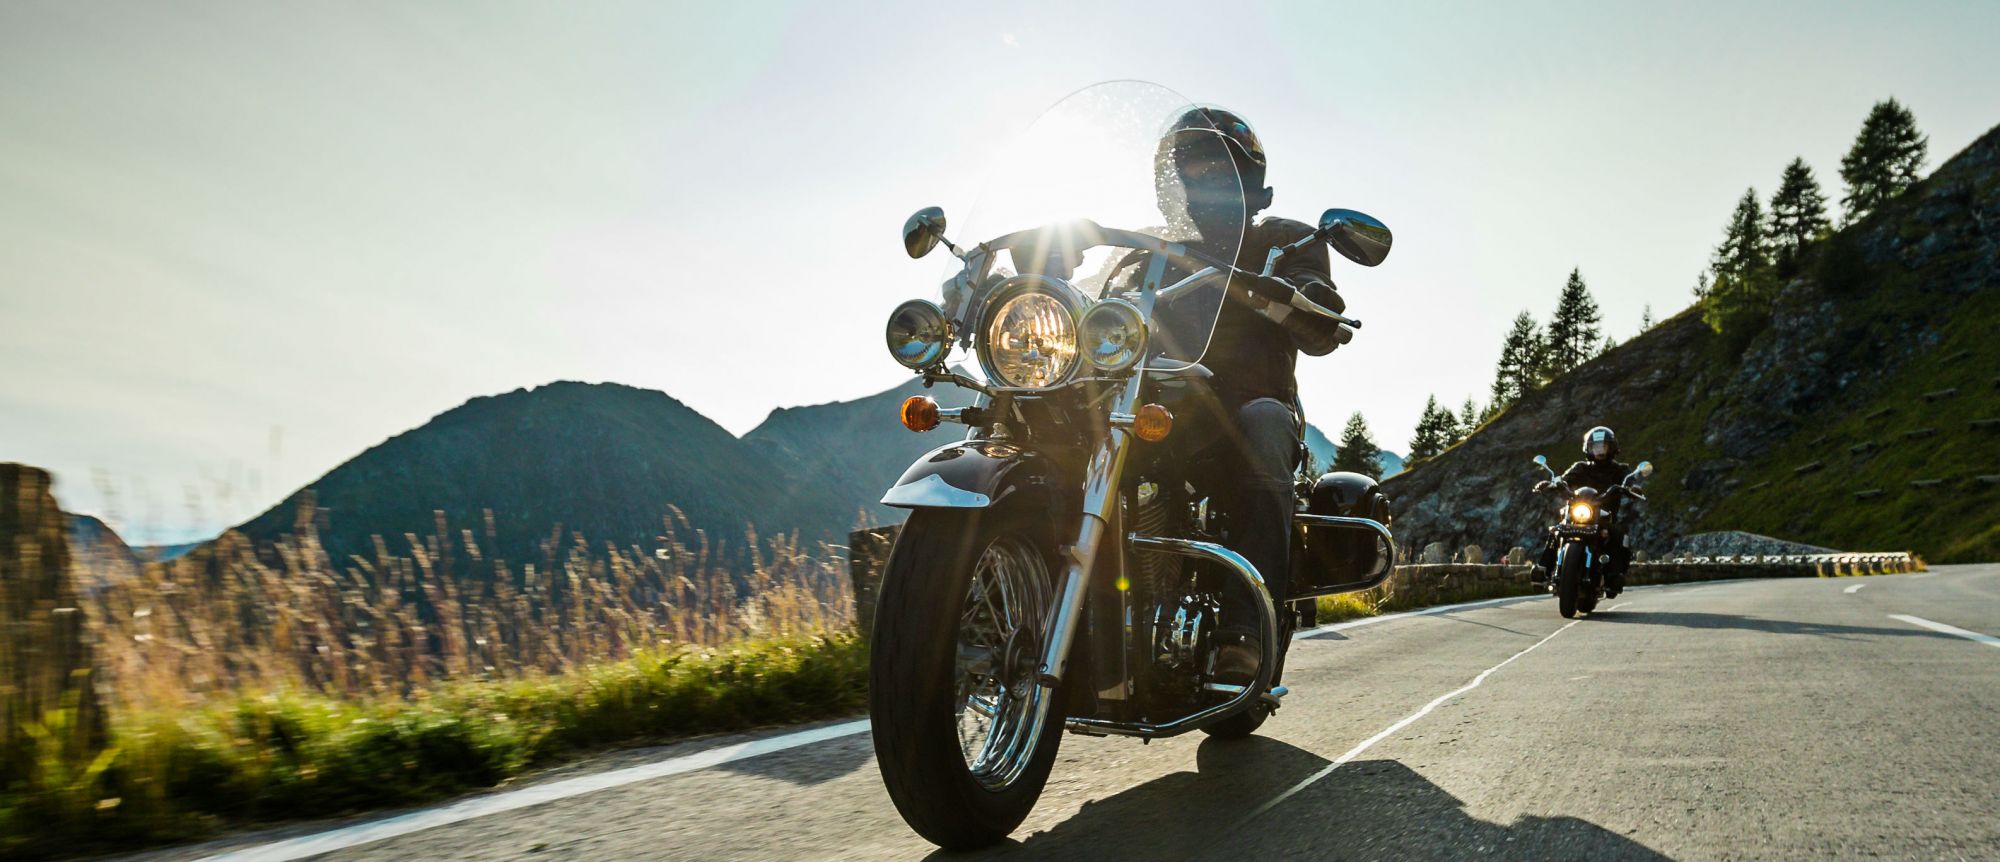 Motorcycle Insurance-Statesville, Hickory, Lenoir, Alexander County, NC